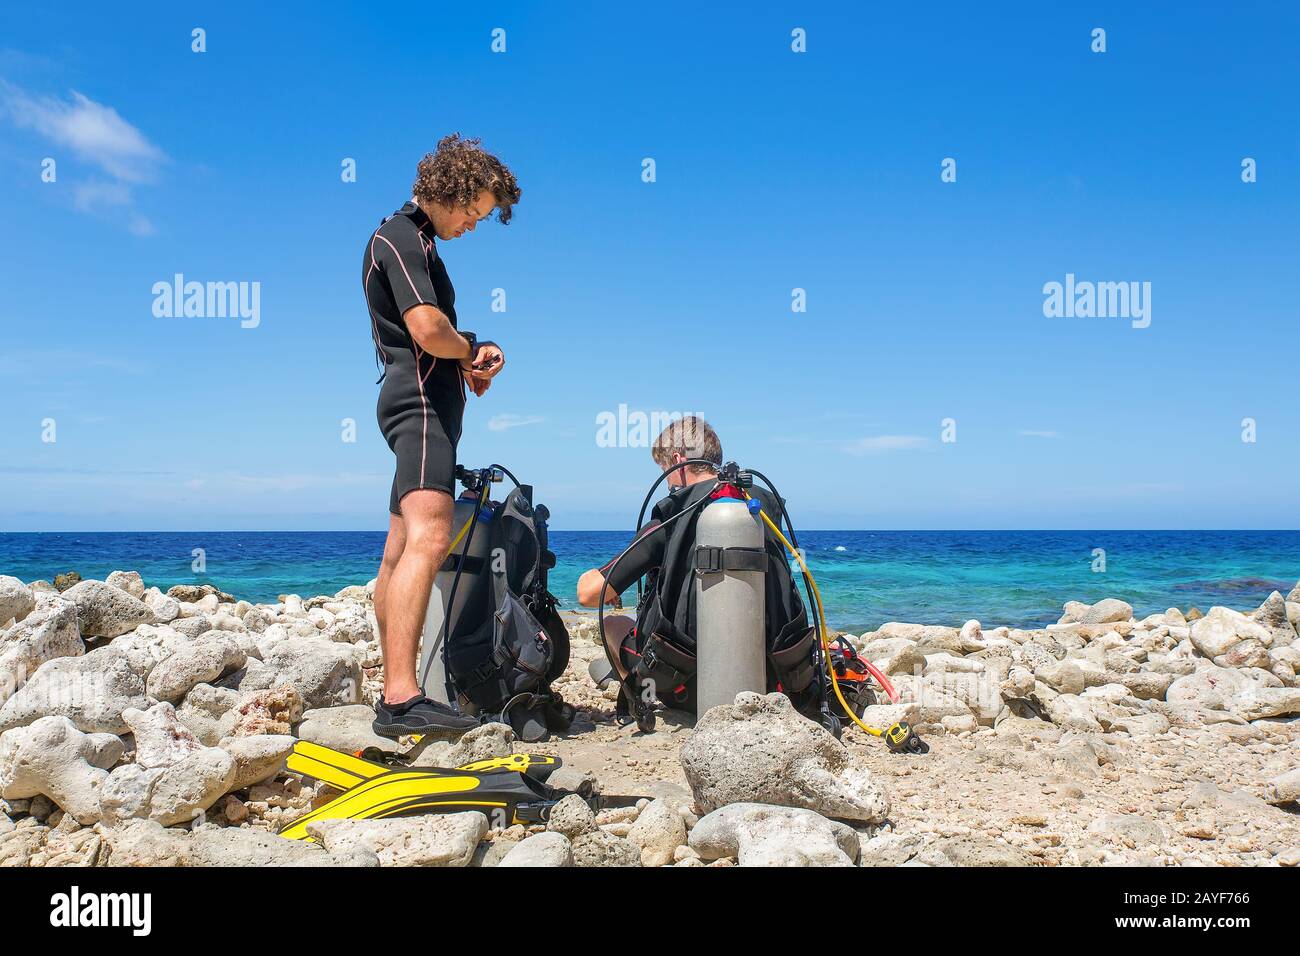 Two divers on the beach prepare for diving Stock Photo